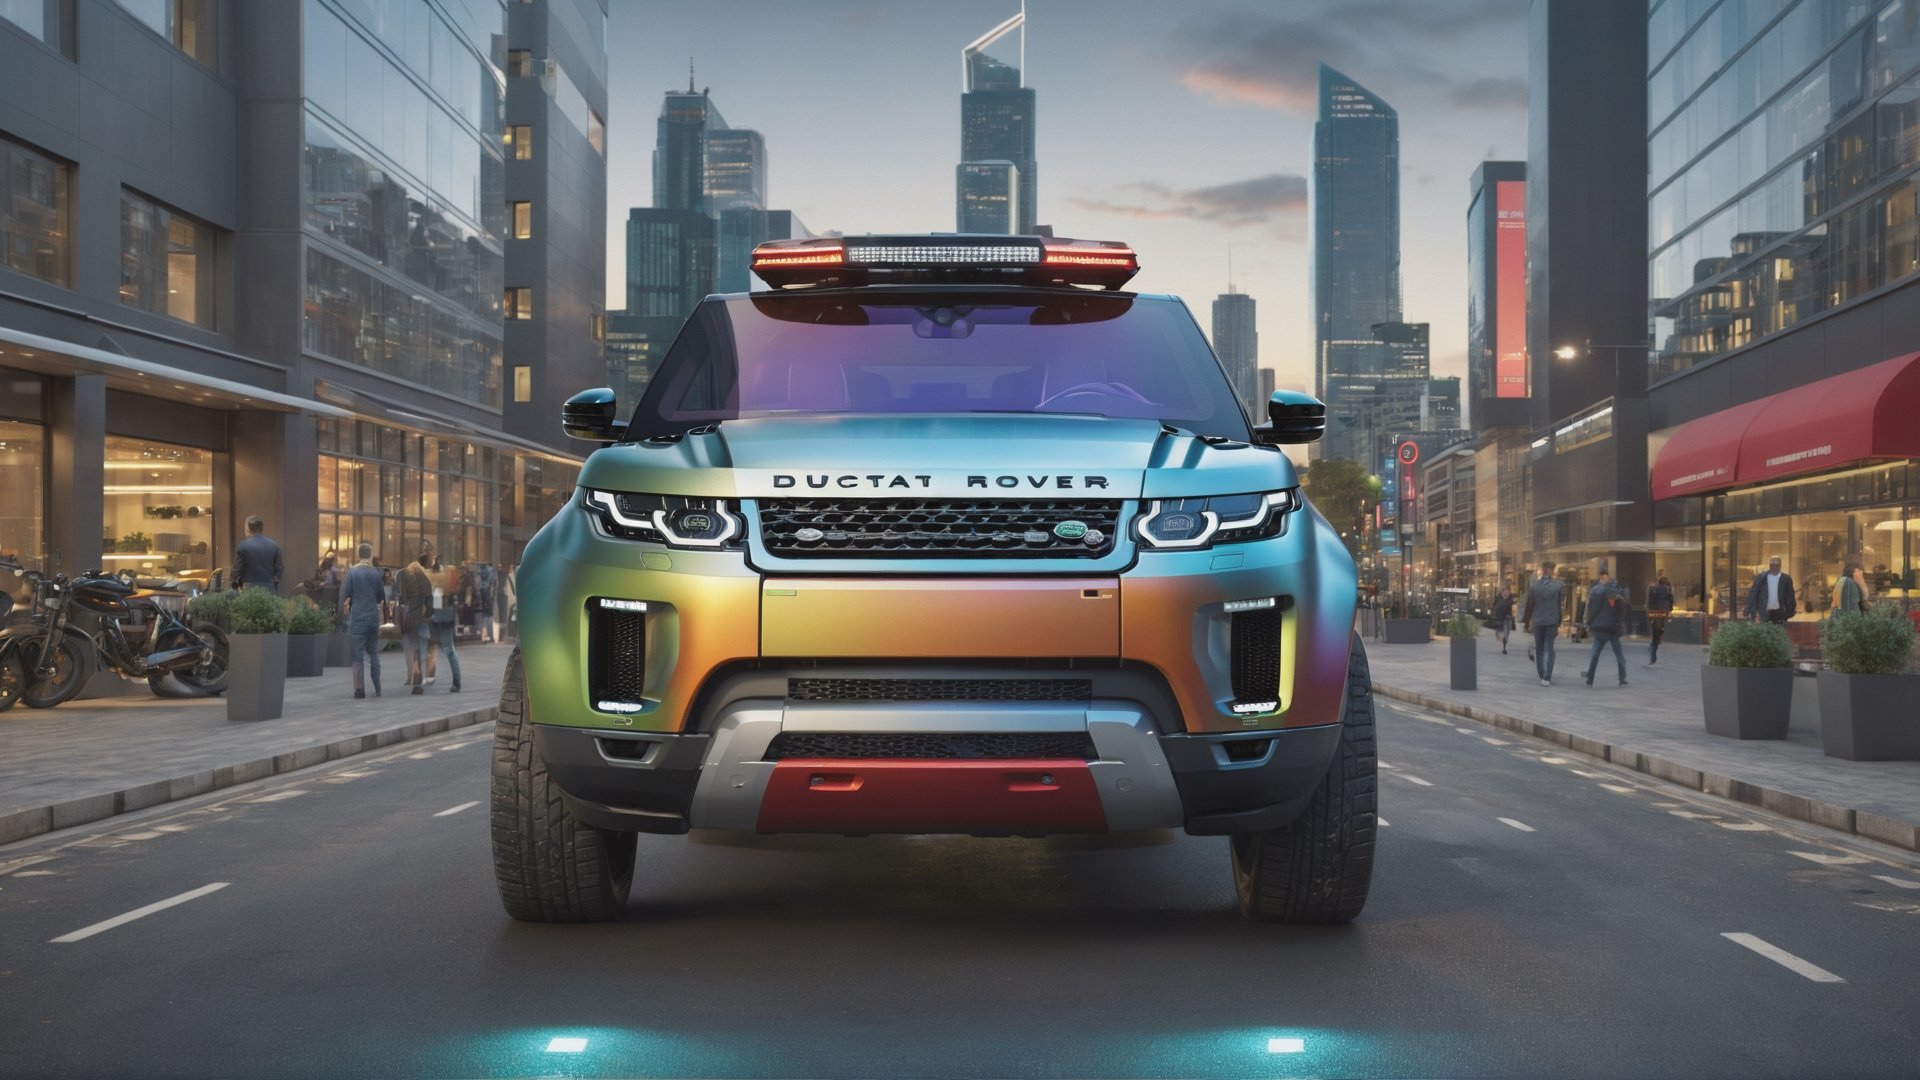 A futuristic hi-tech Land Rover inspired by Ducatti, parked in city area background, perspective view, symmetrical, multi-coloured, more detail XL, photorealistic